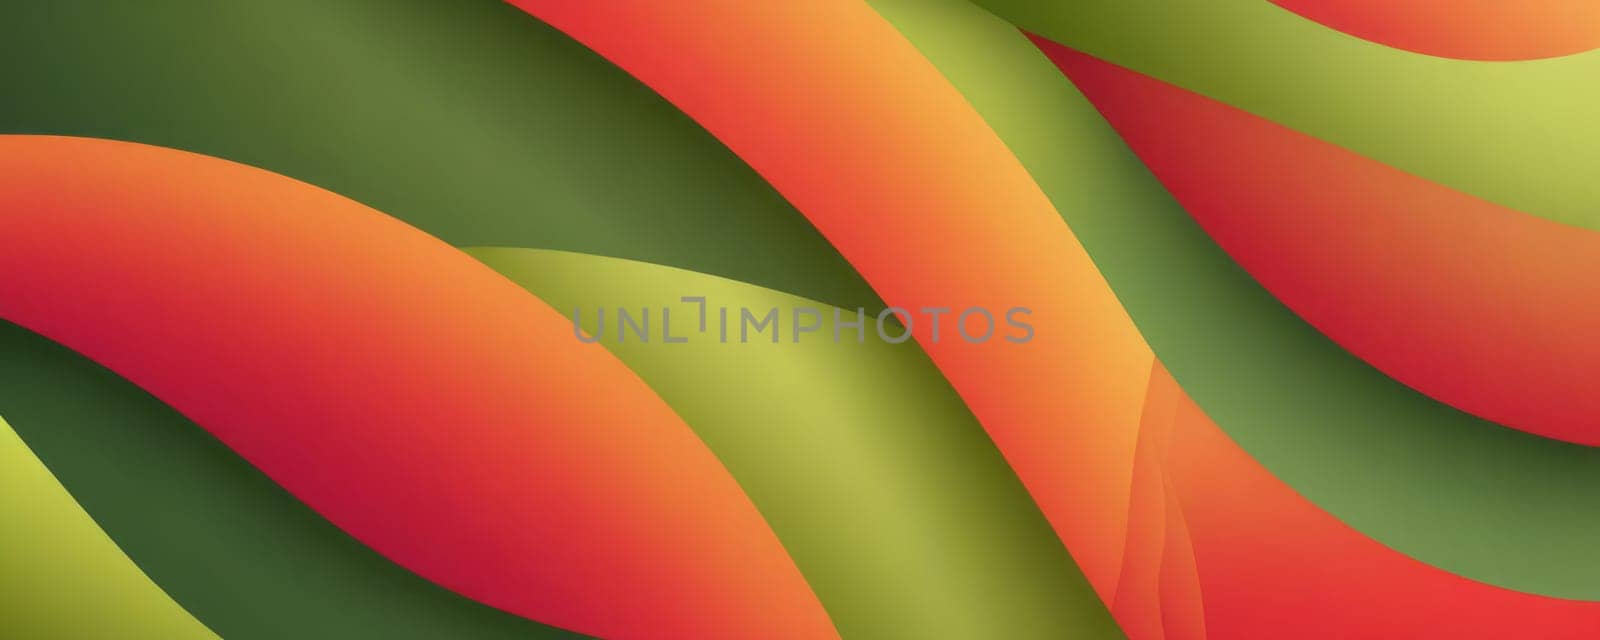 Freeform Shapes in Olive Tomato by nkotlyar